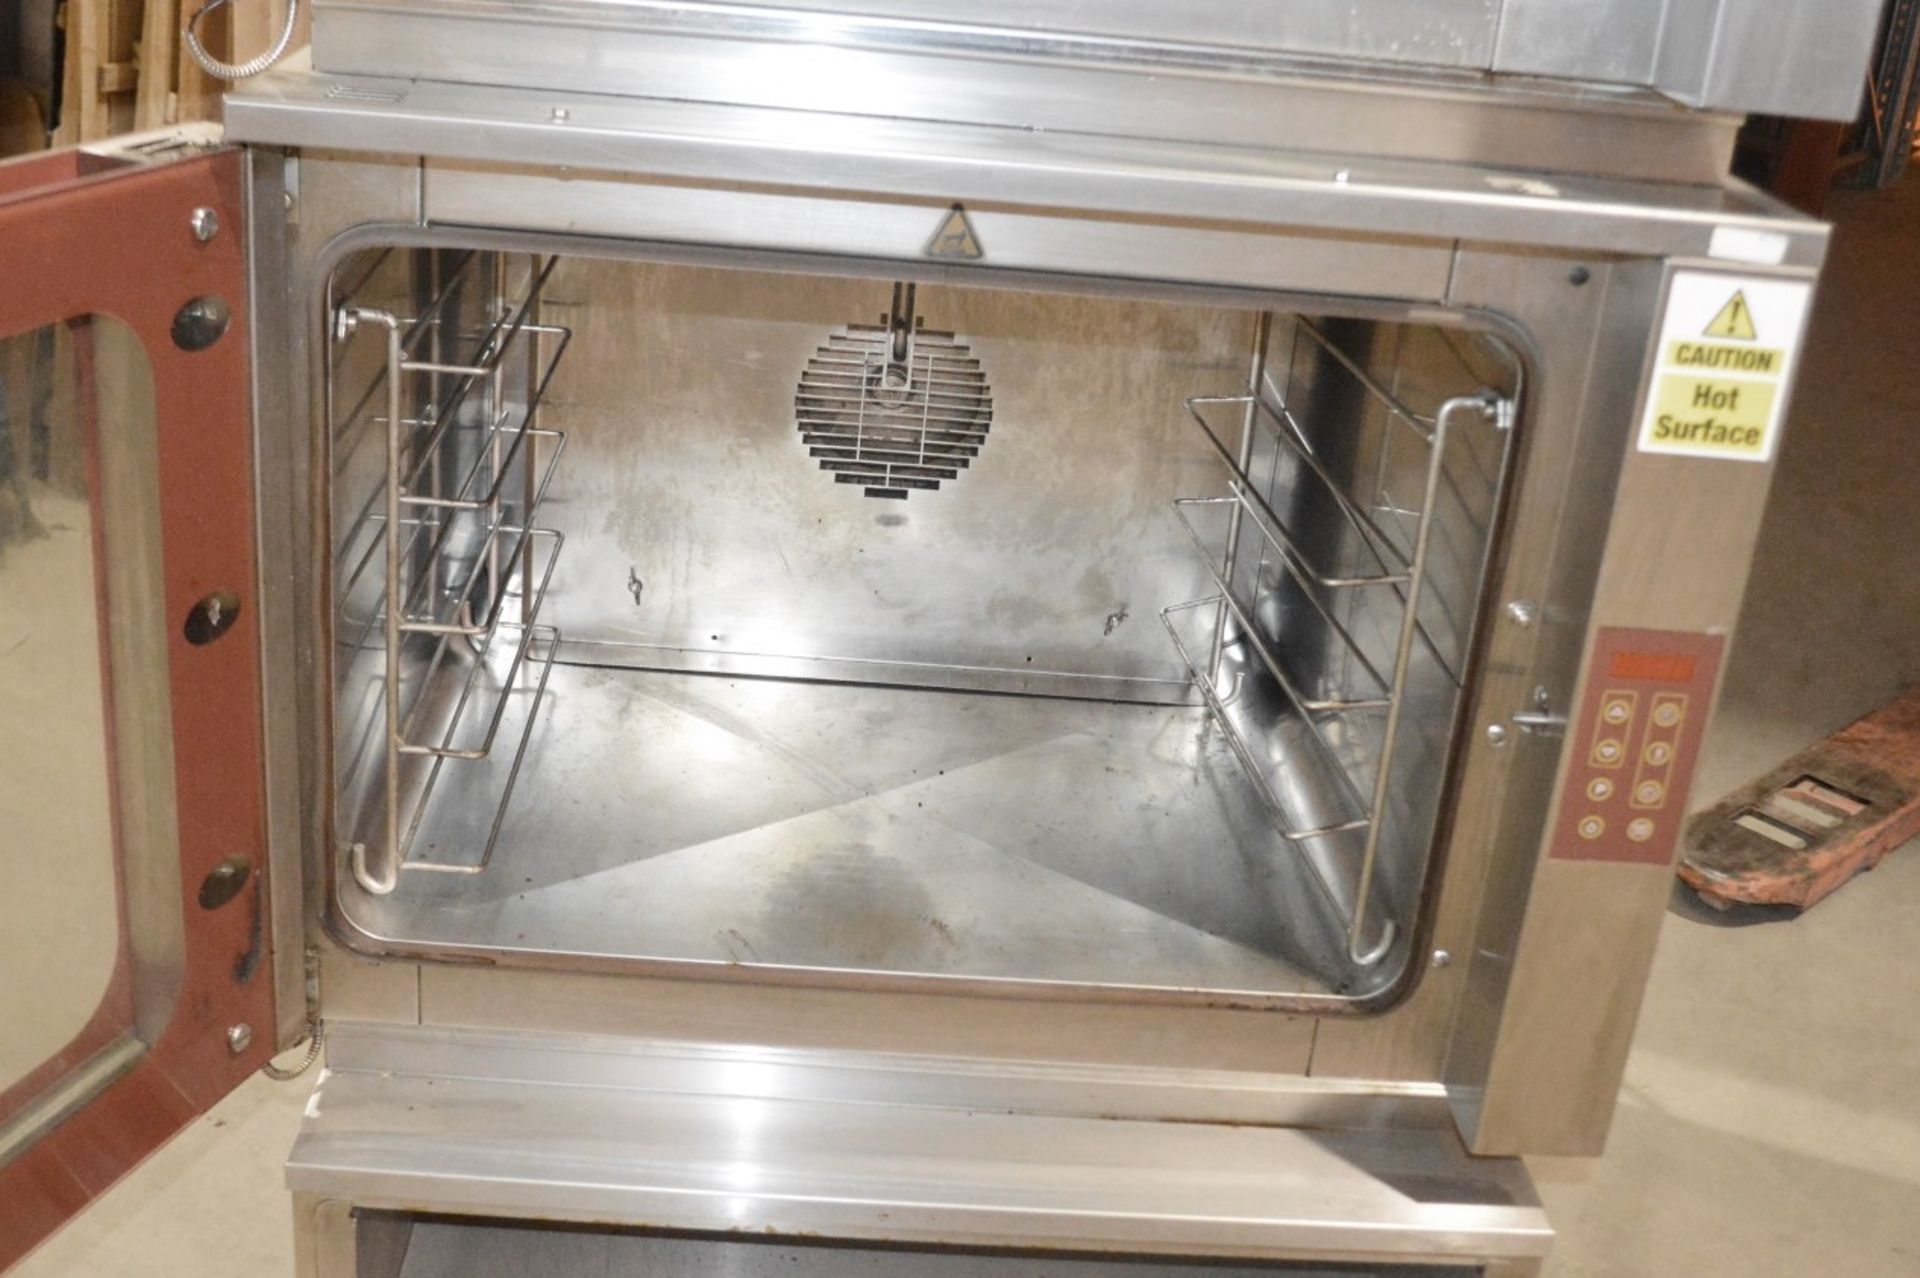 1 x FRI-JADO Stainless Steel Commercial Double Oven And Stand - Dimensions: H180 x W84 x D83cm - - Image 8 of 12